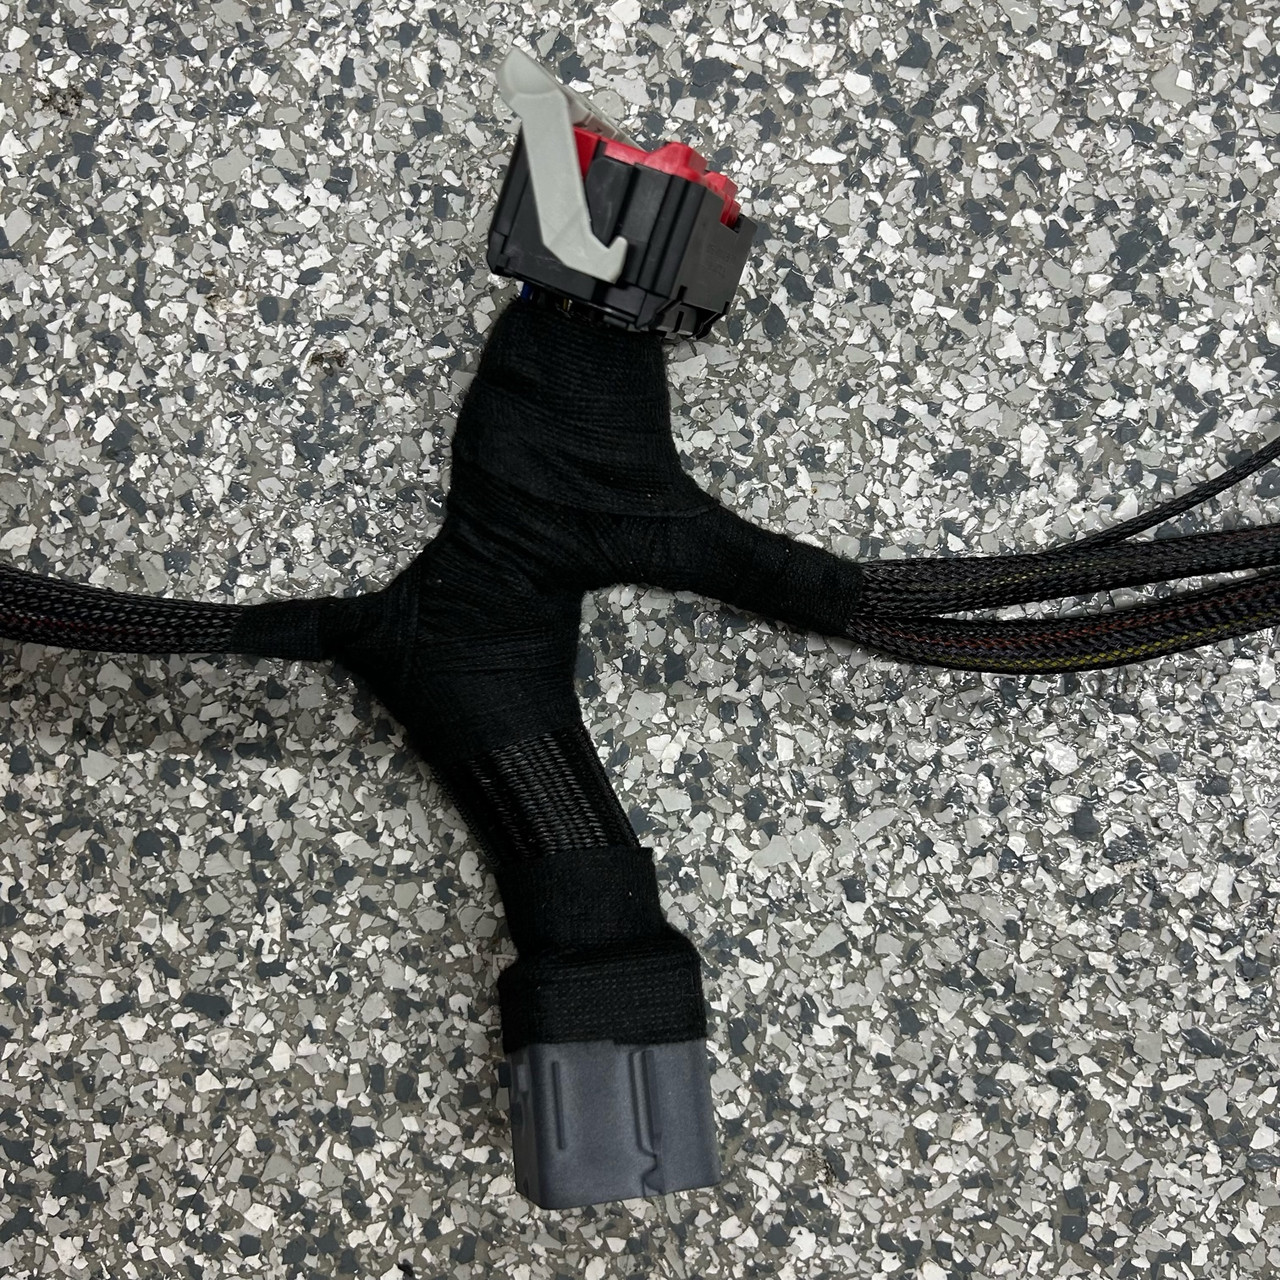 2005-2009 Mustang Coyote Swap Plug and Play Harness by Make It Modular 